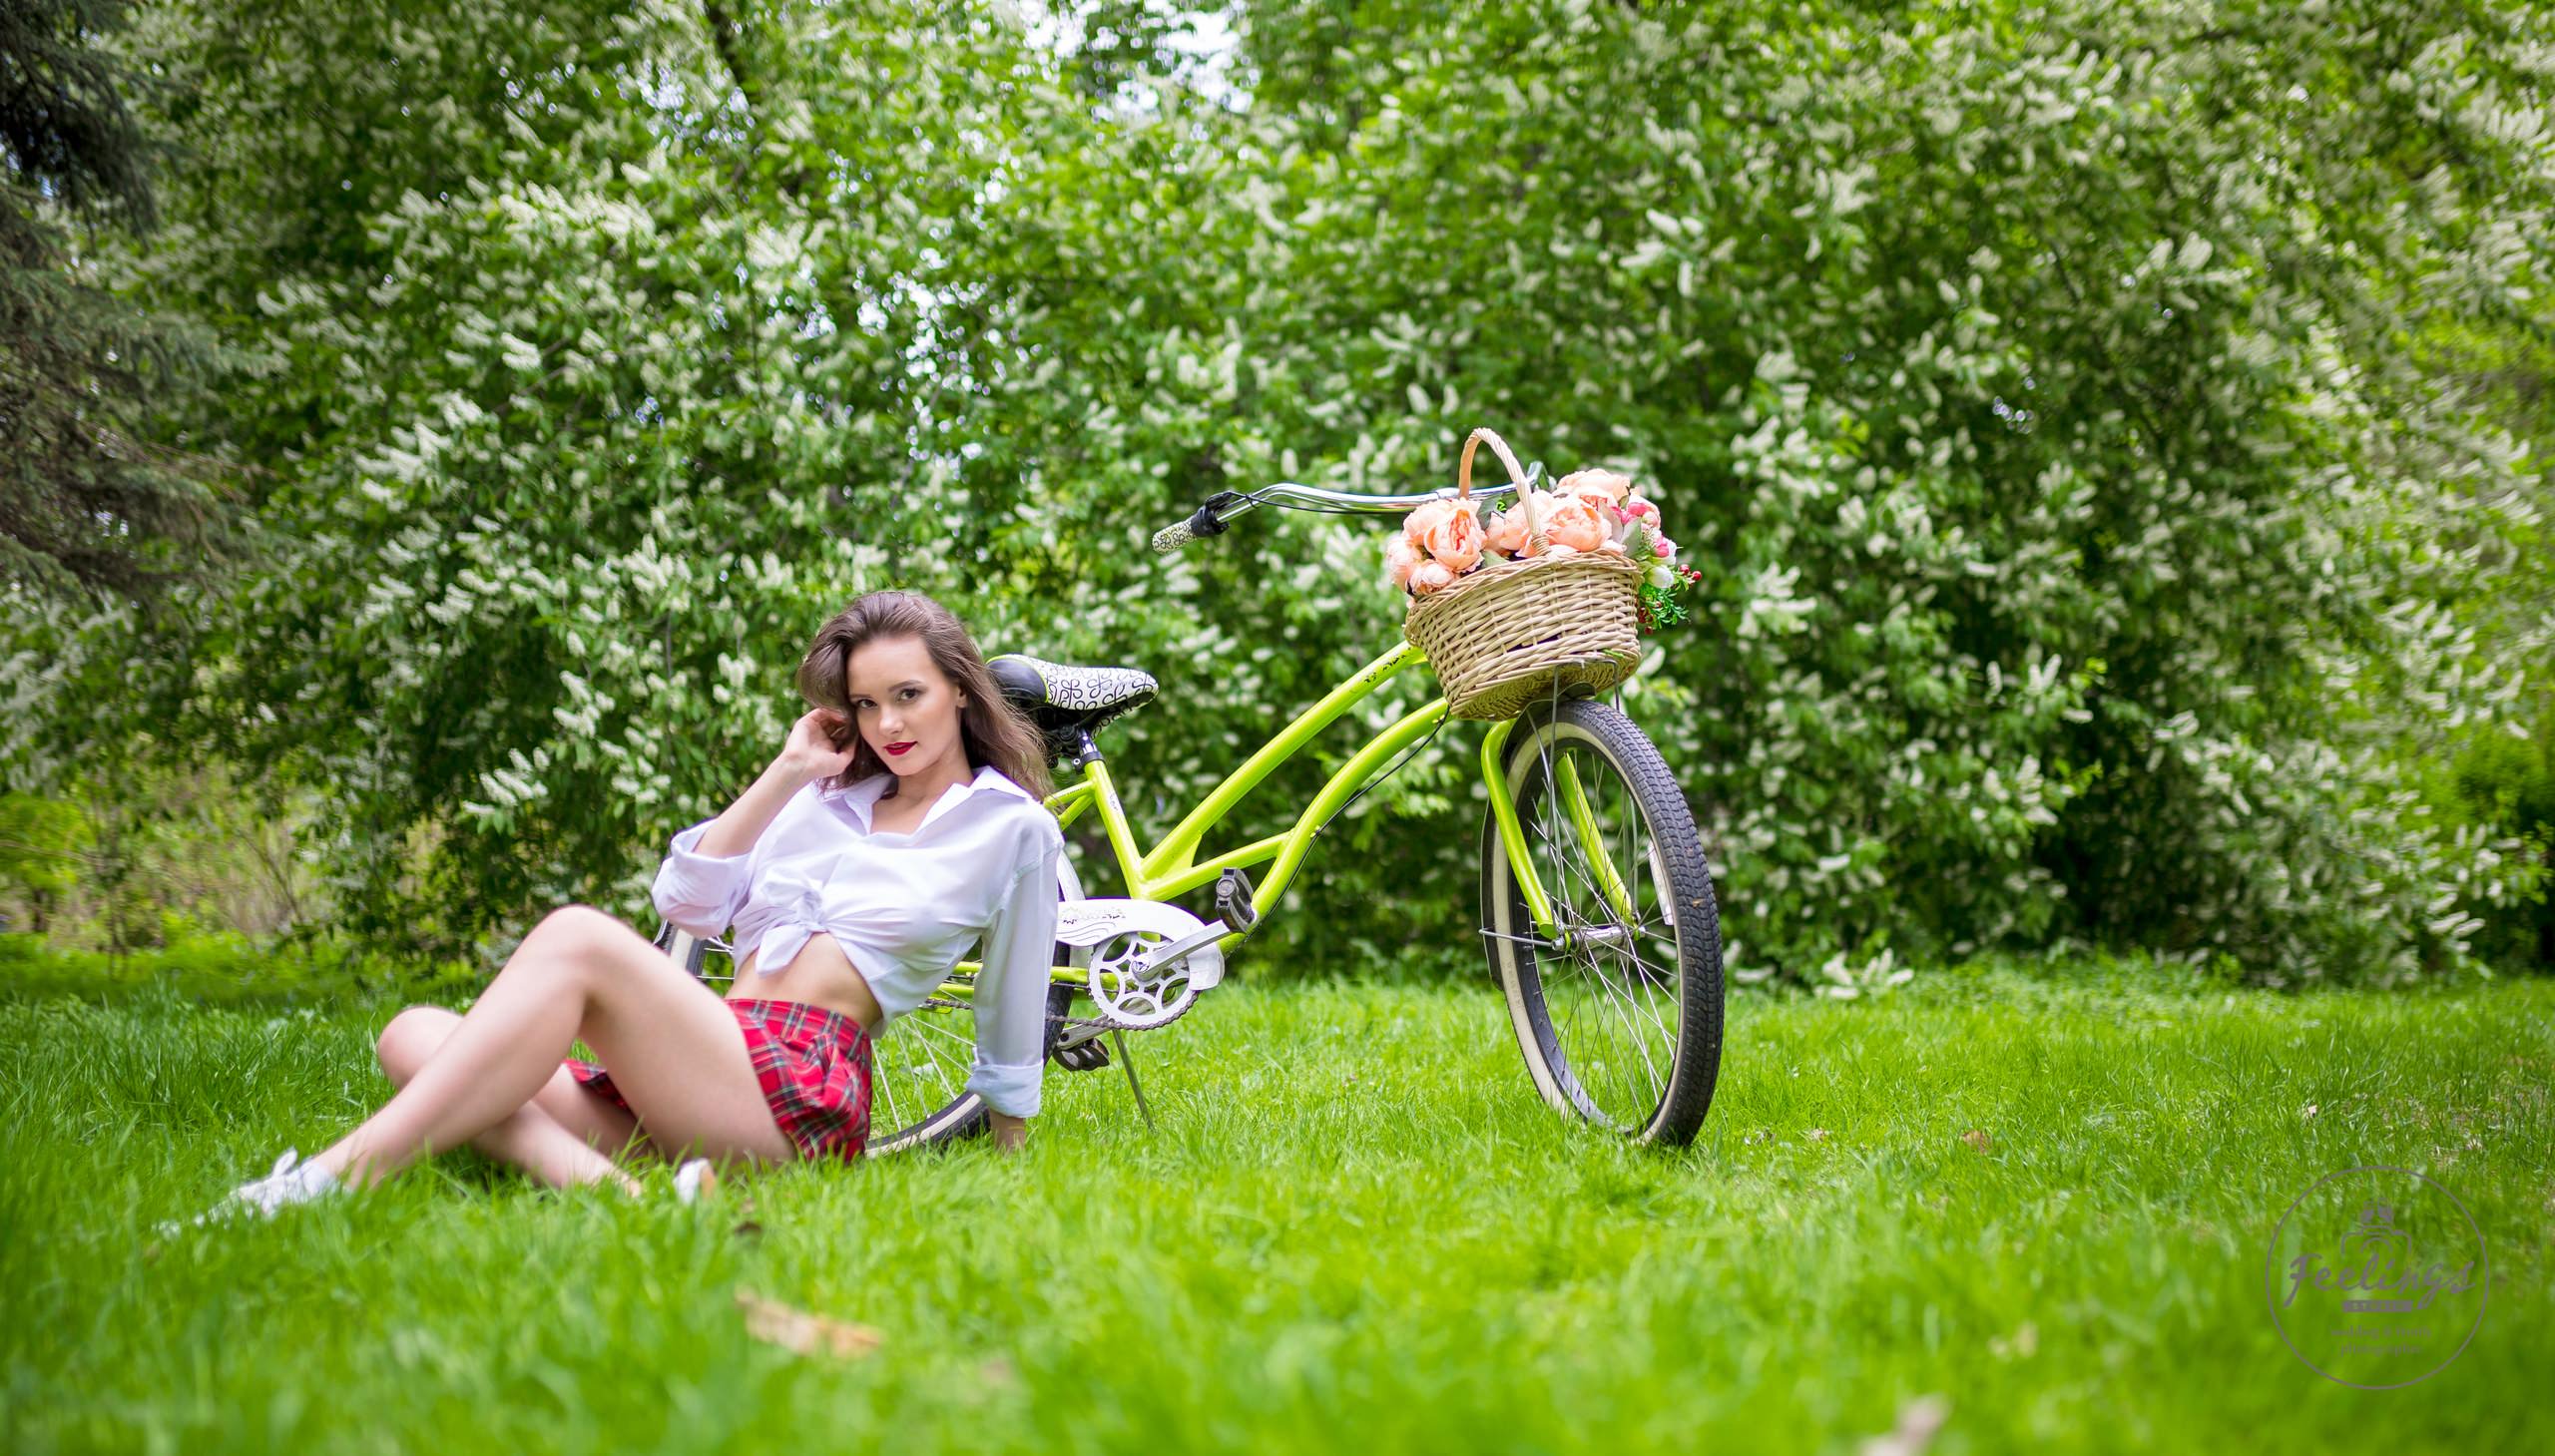 People 2560x1459 women plaid skirt white shirt school uniform flowers women outdoors women with bicycles bicycle sitting grass red lipstick sneakers smiling skirt white socks